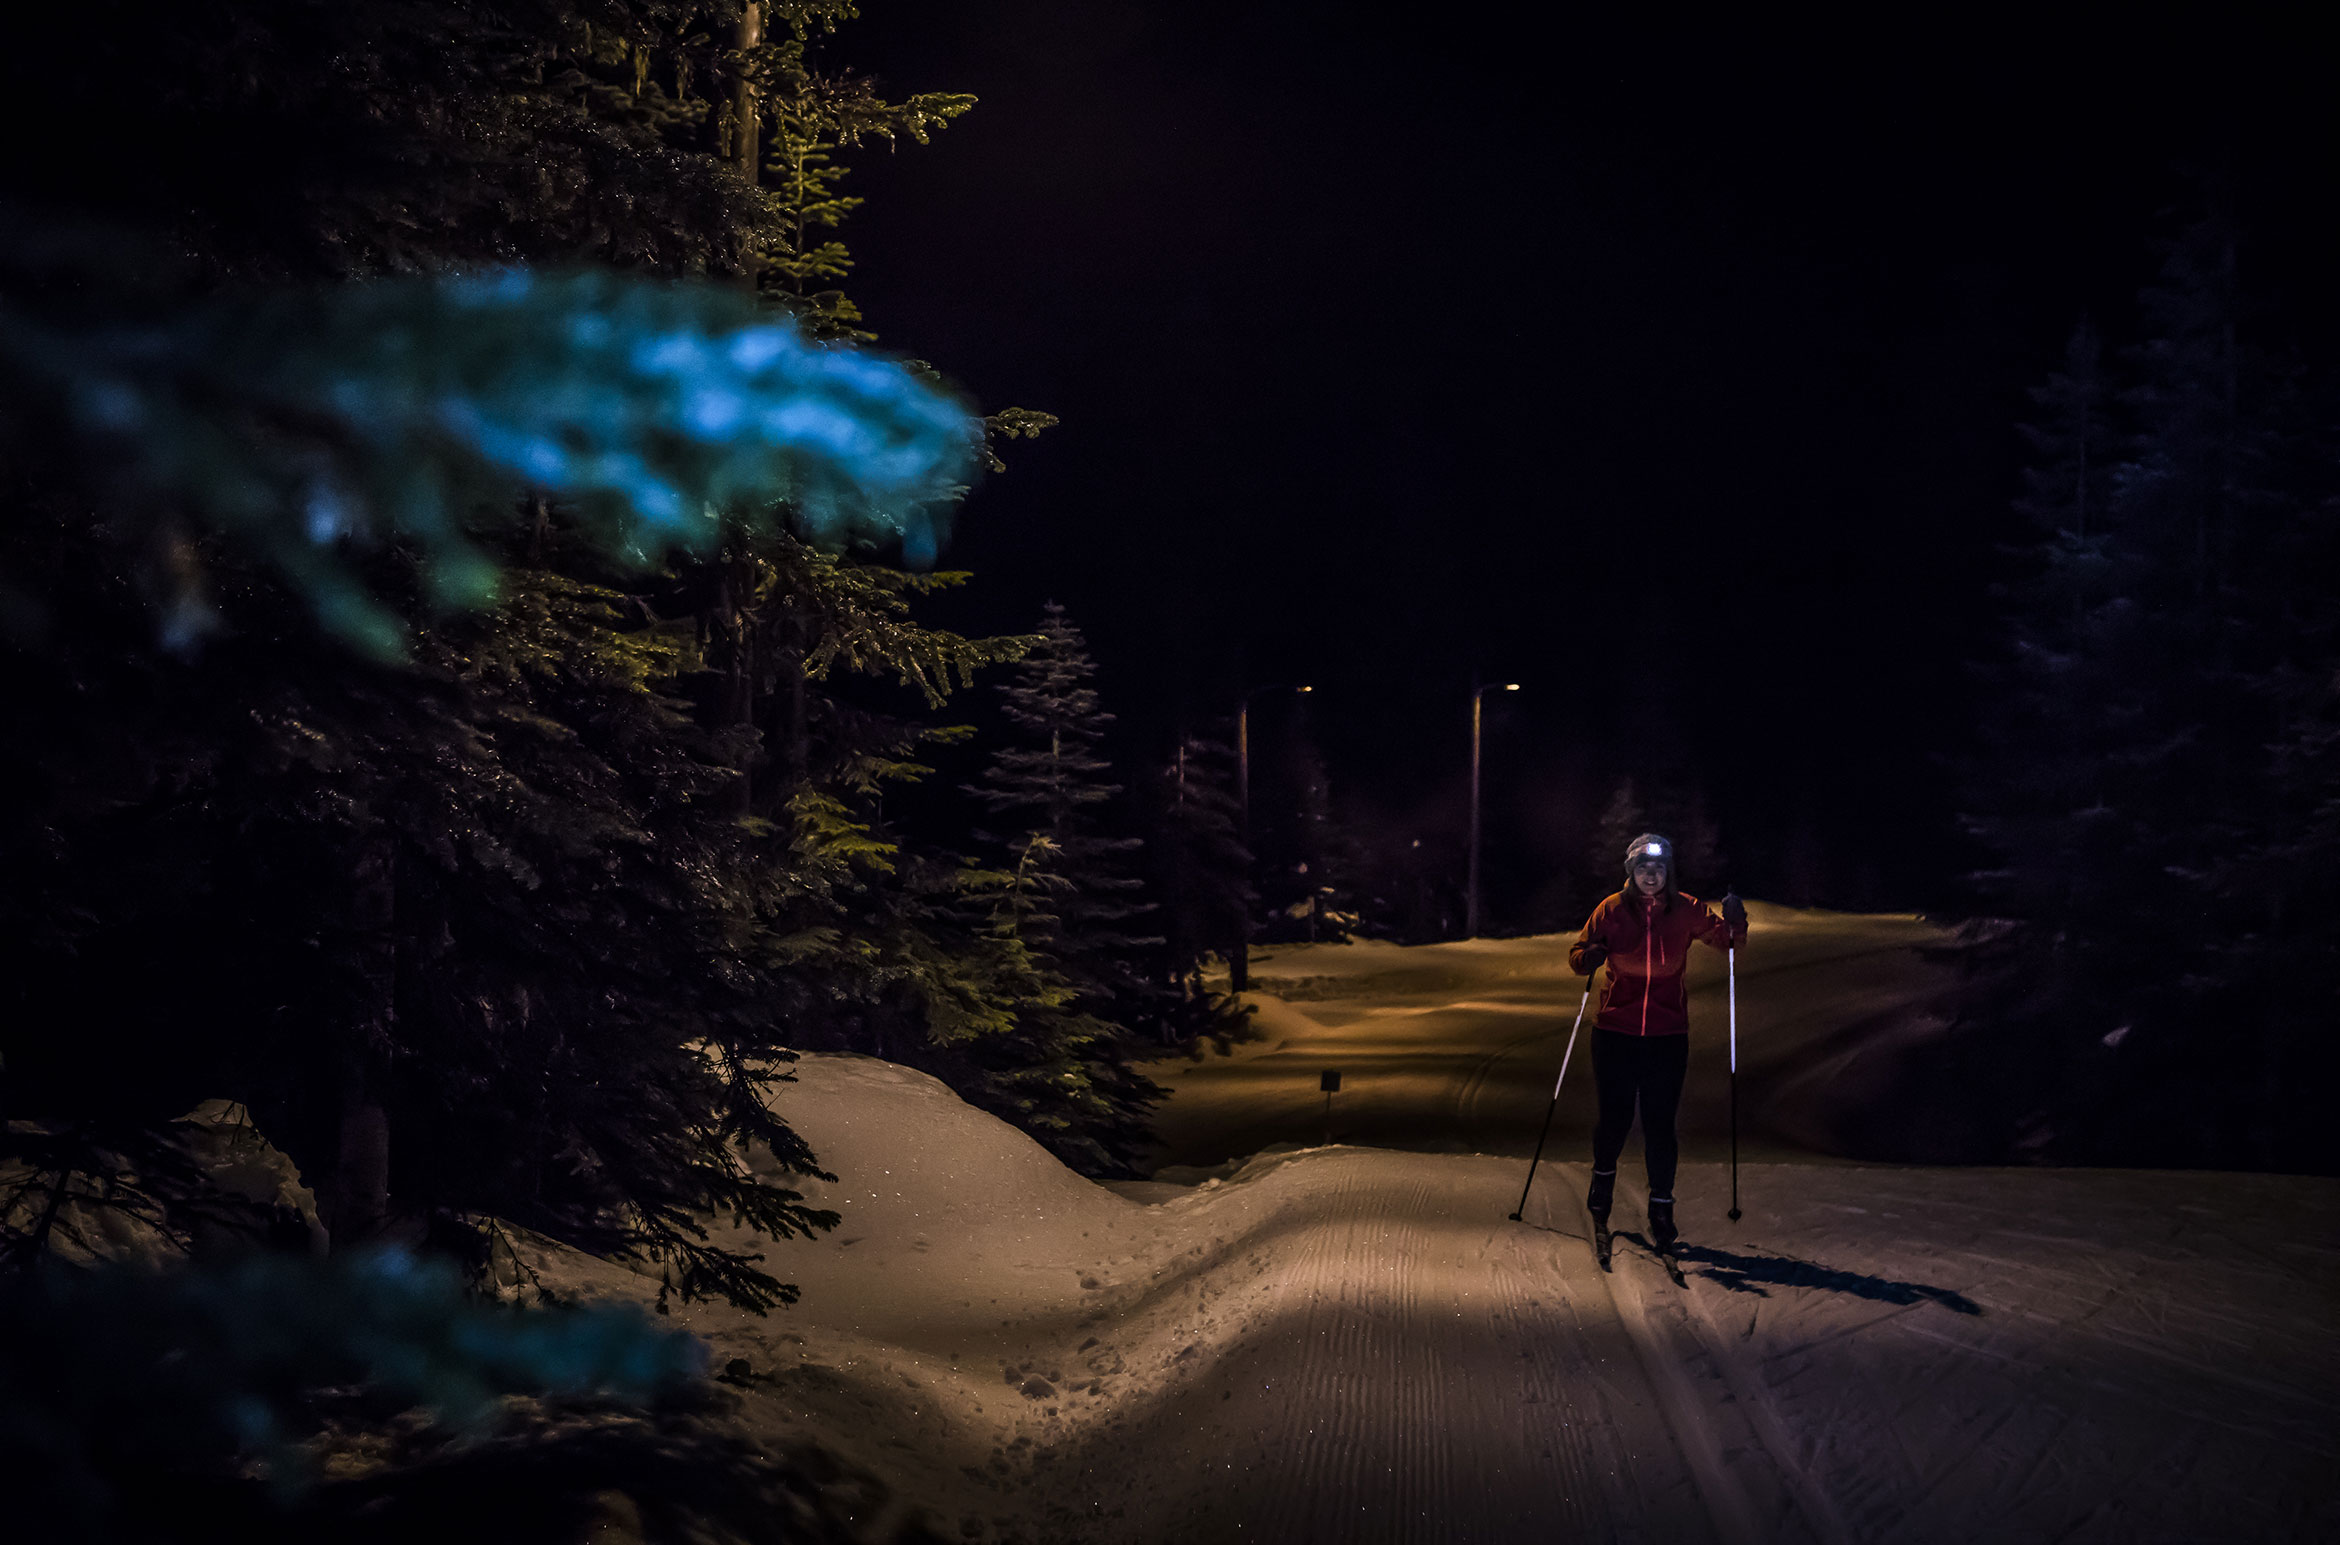 A cross-country skier glides around Lost Lake in the dark.